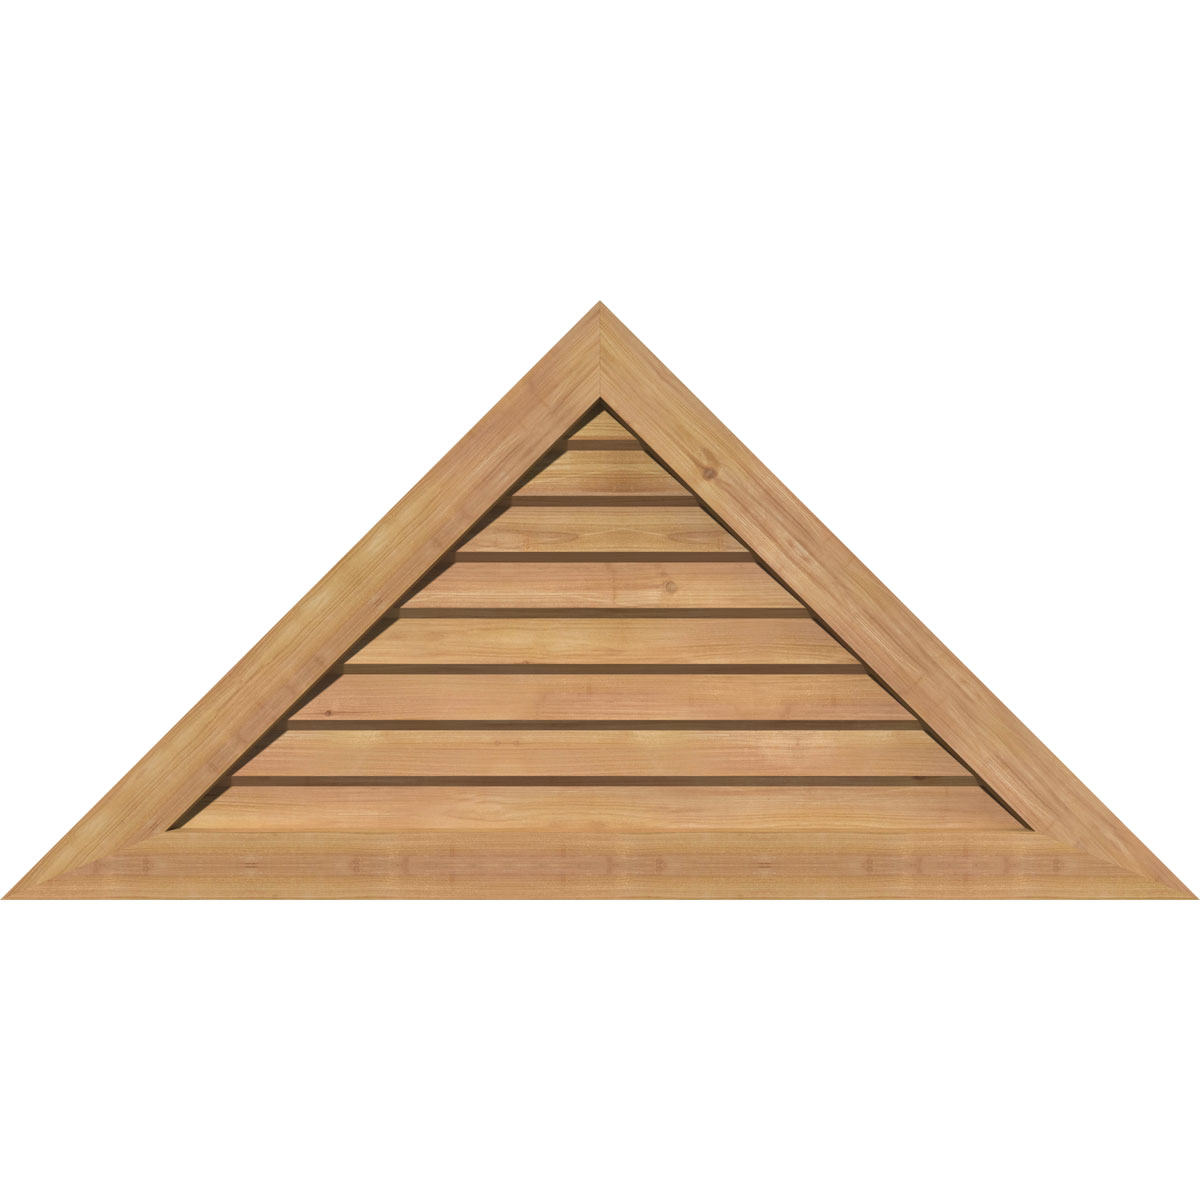 84"W X 38 1/2"H Triangle Gable Vent (96 7/8"W X 44 3/8"H Frame Size) 11/12 Pitch: Unfinished, Non-Functional, Smooth Western Red Cedar Gable Vent W/ Decorative Face Frame - image 1 of 12